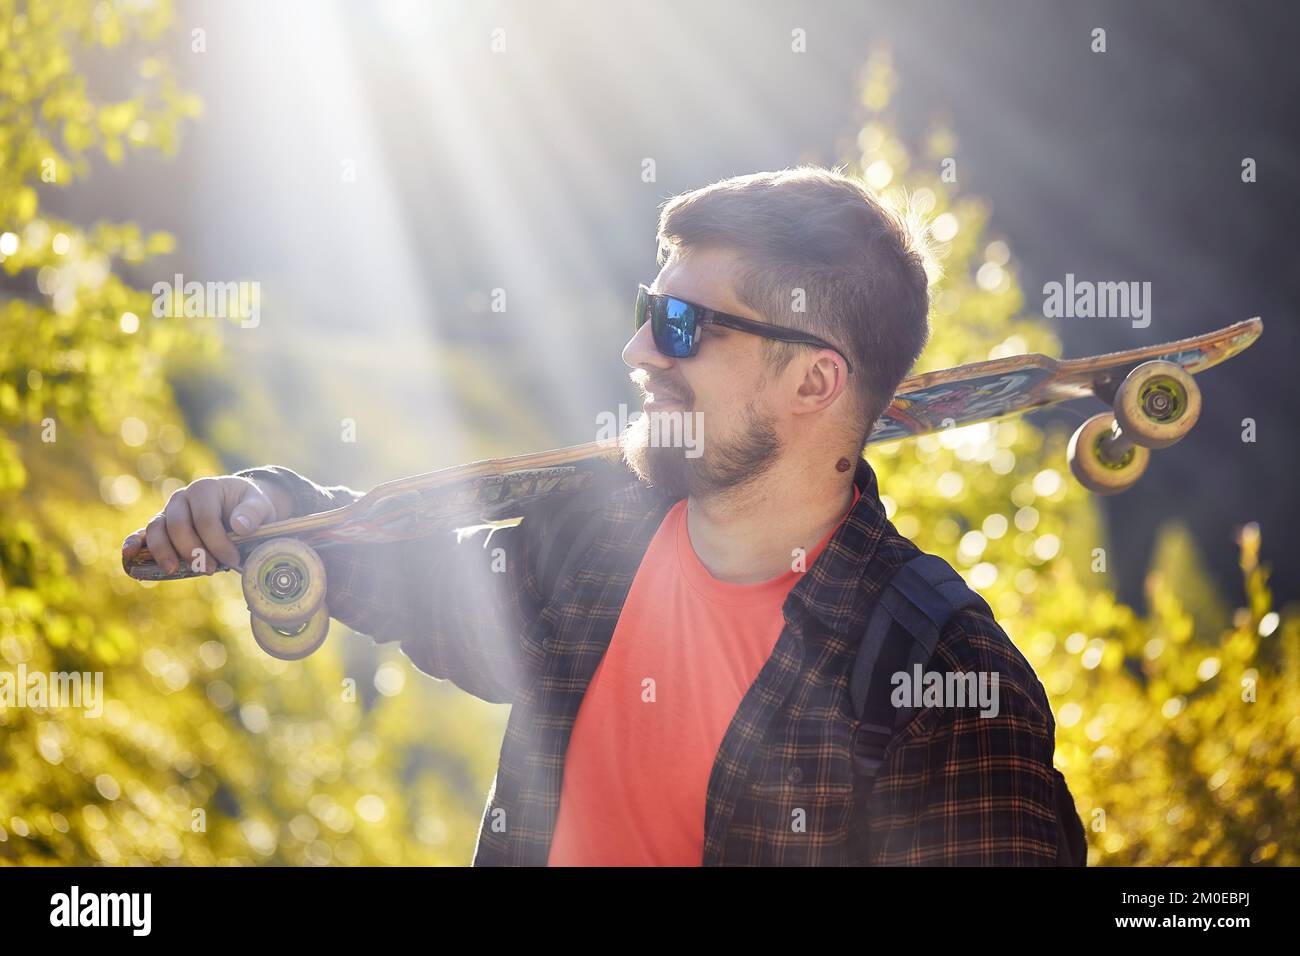 Portrait of serious bearded man Skater with sunglasses holding his longboard in the mountain forest and glowing sunrise rays background Stock Photo